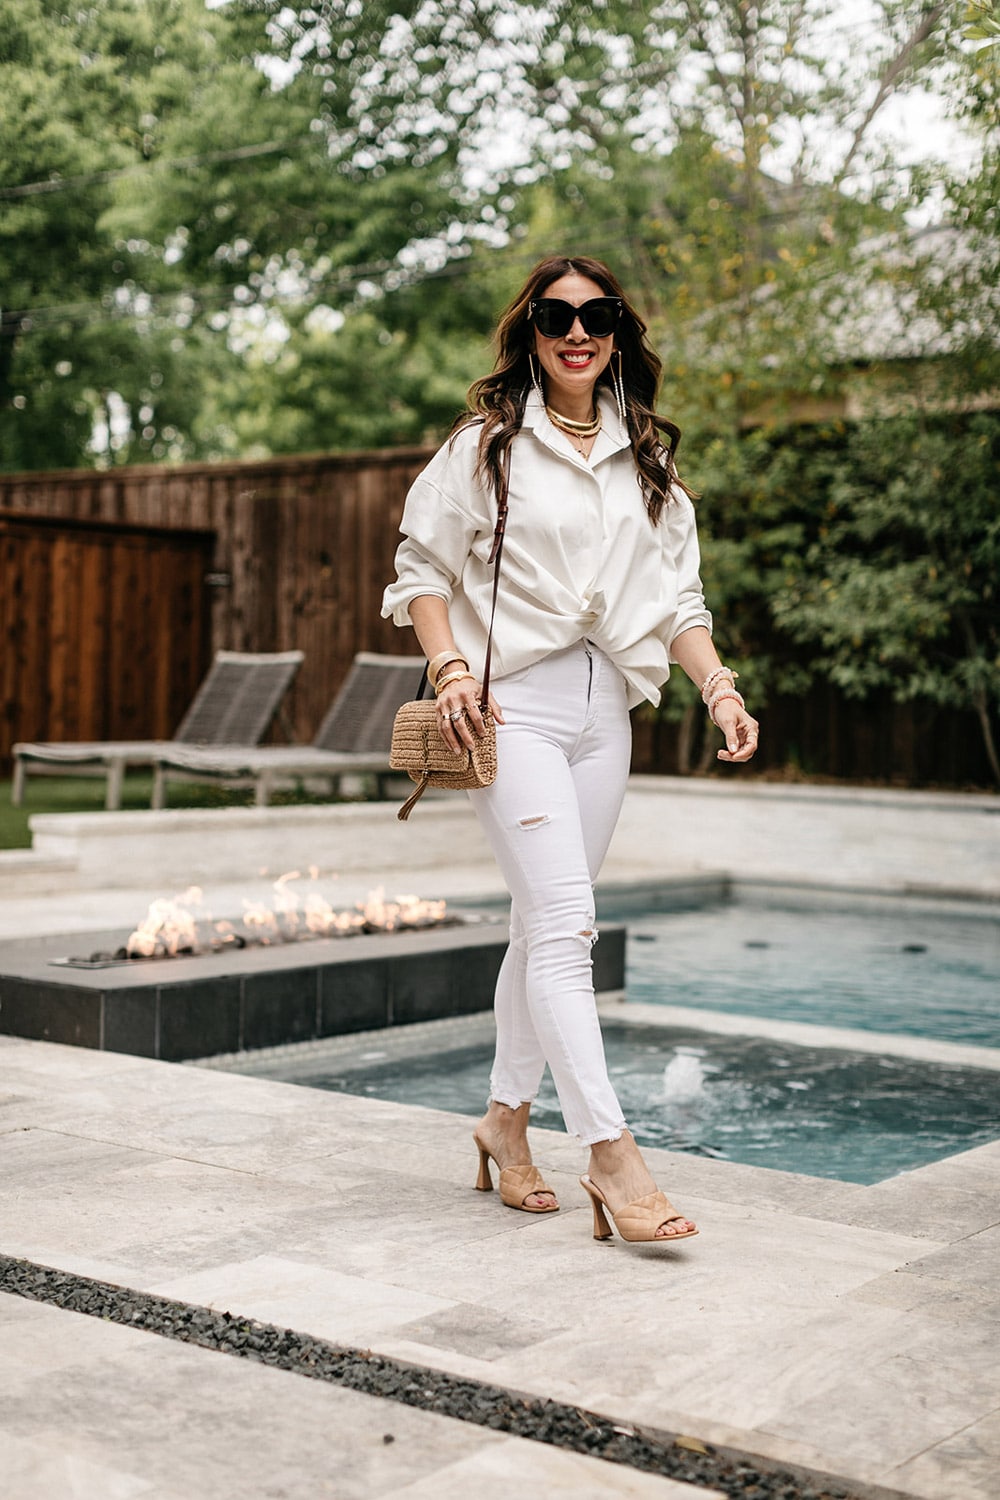 style of sam in noble 31 lolo white button down shirt, white jeans, YSL raffia bag